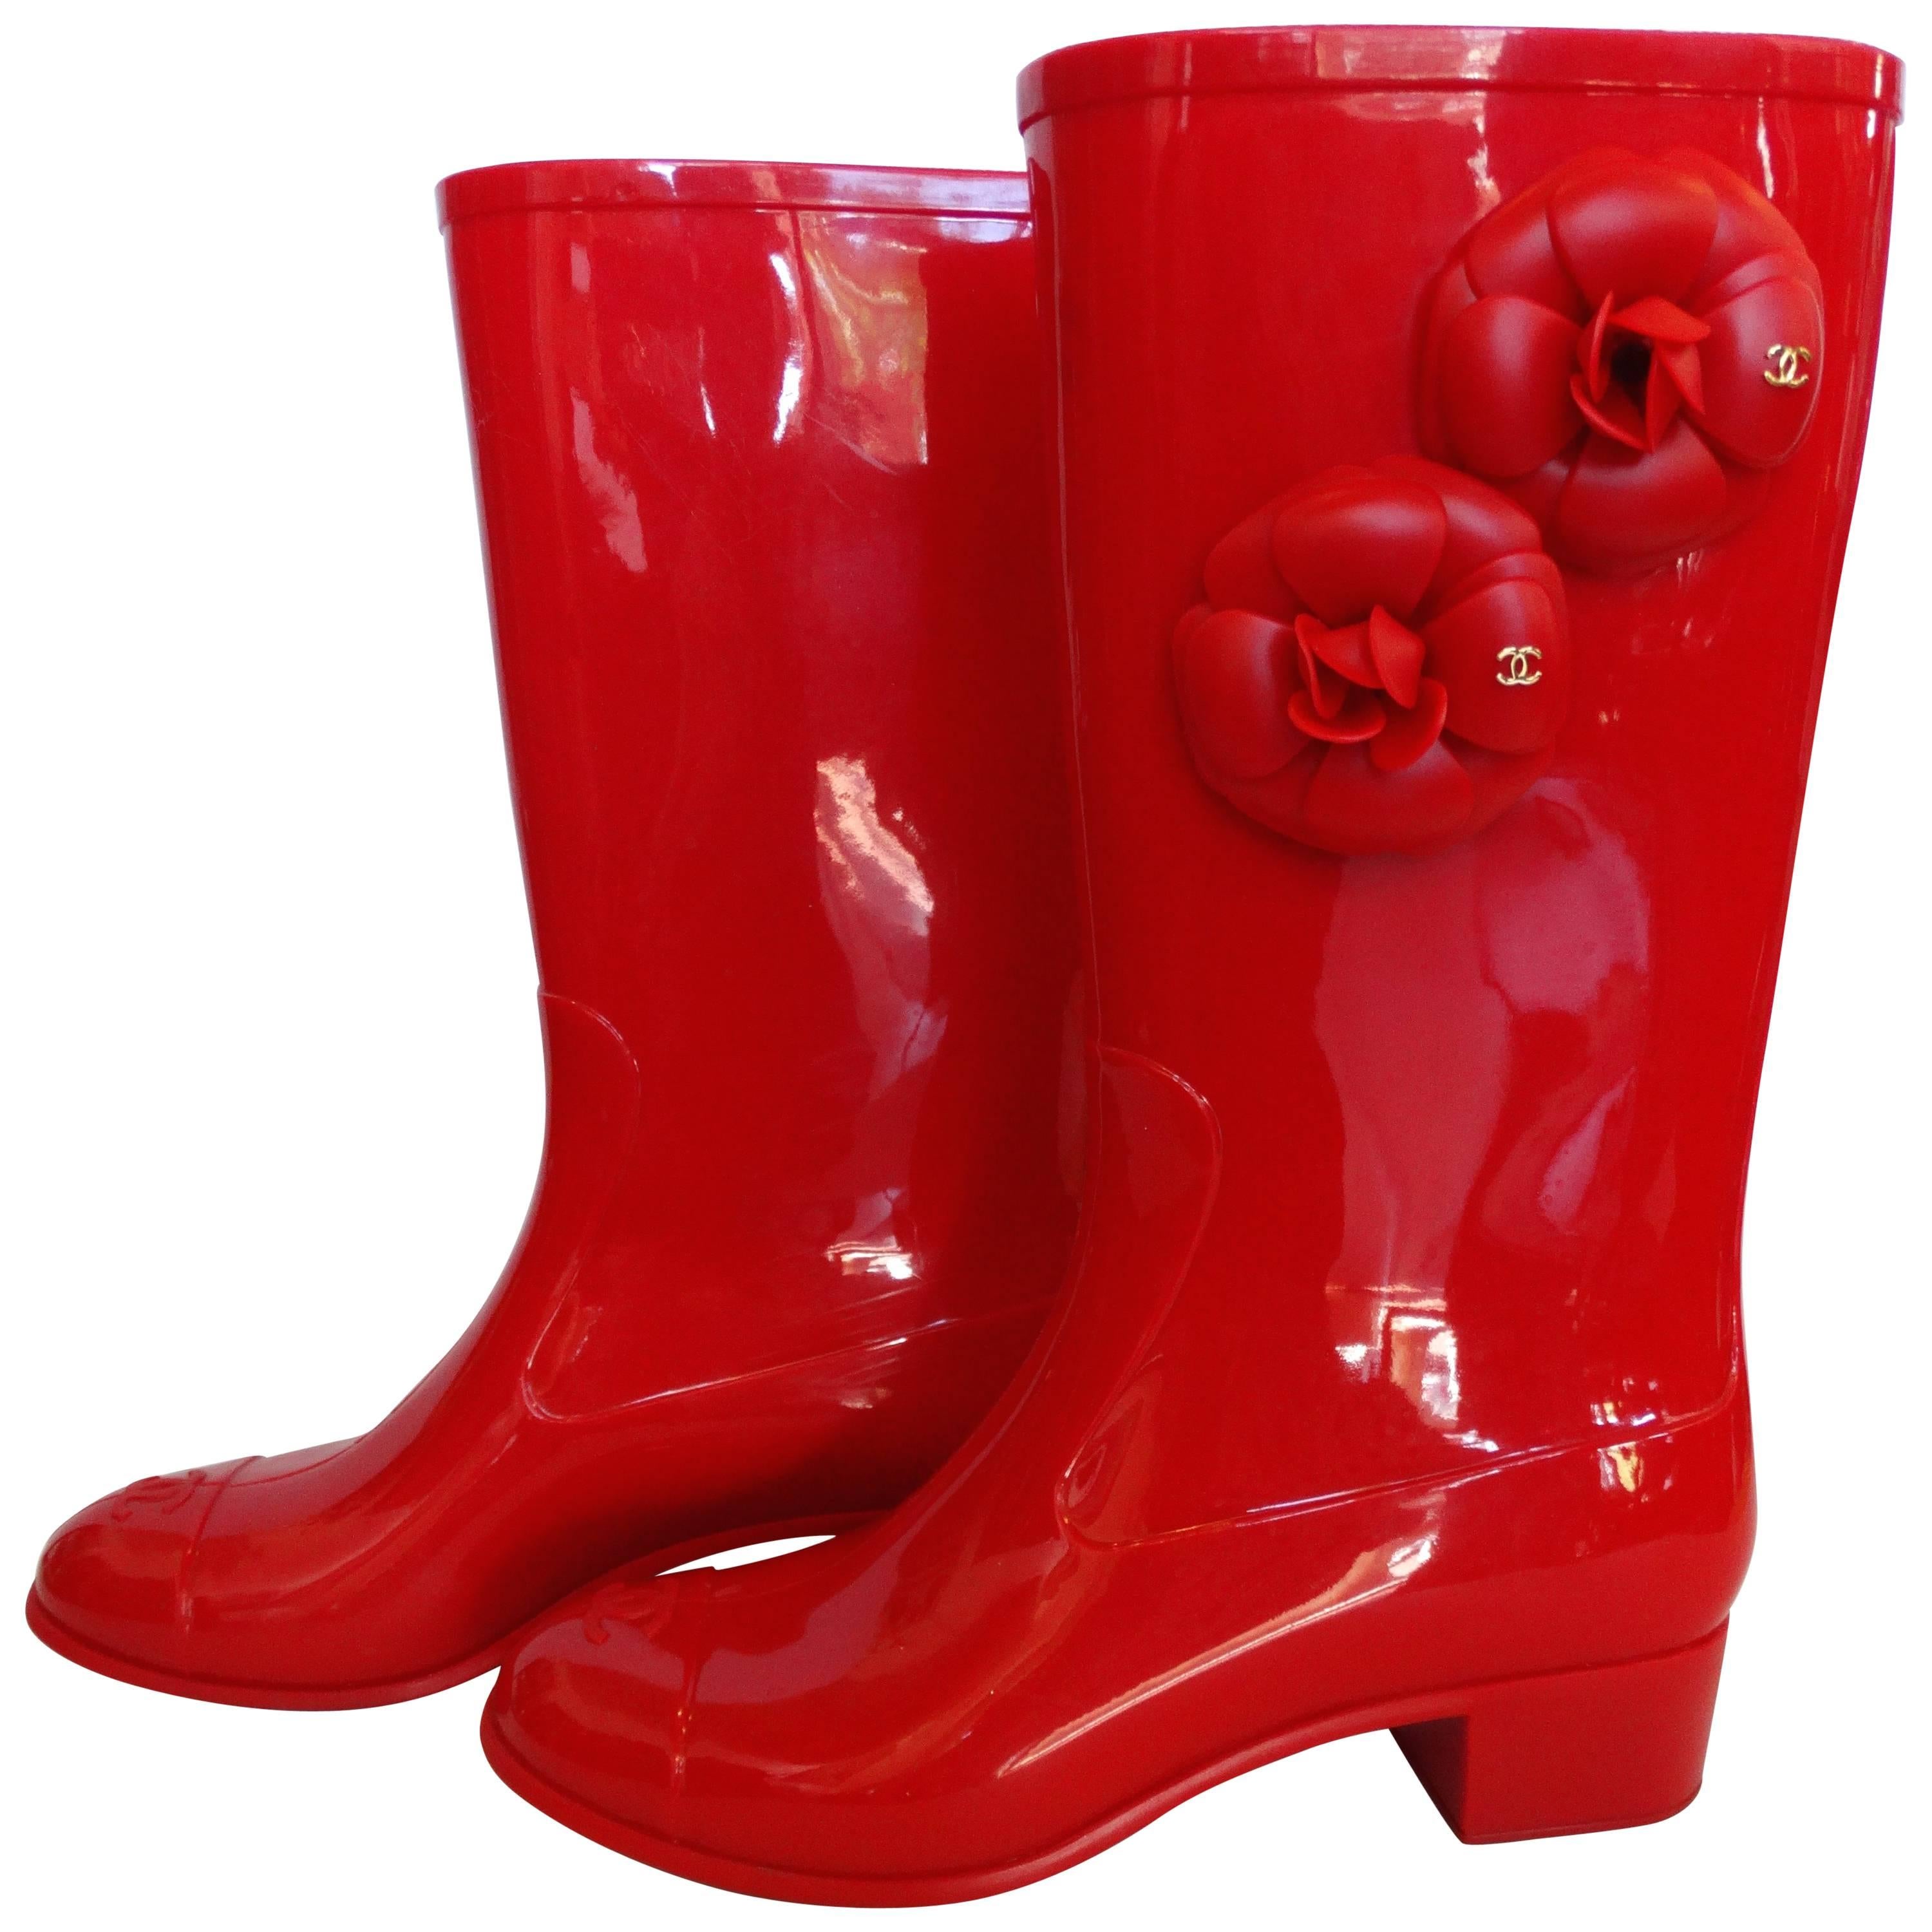 Chanel Red Camellia Flower Wellies 